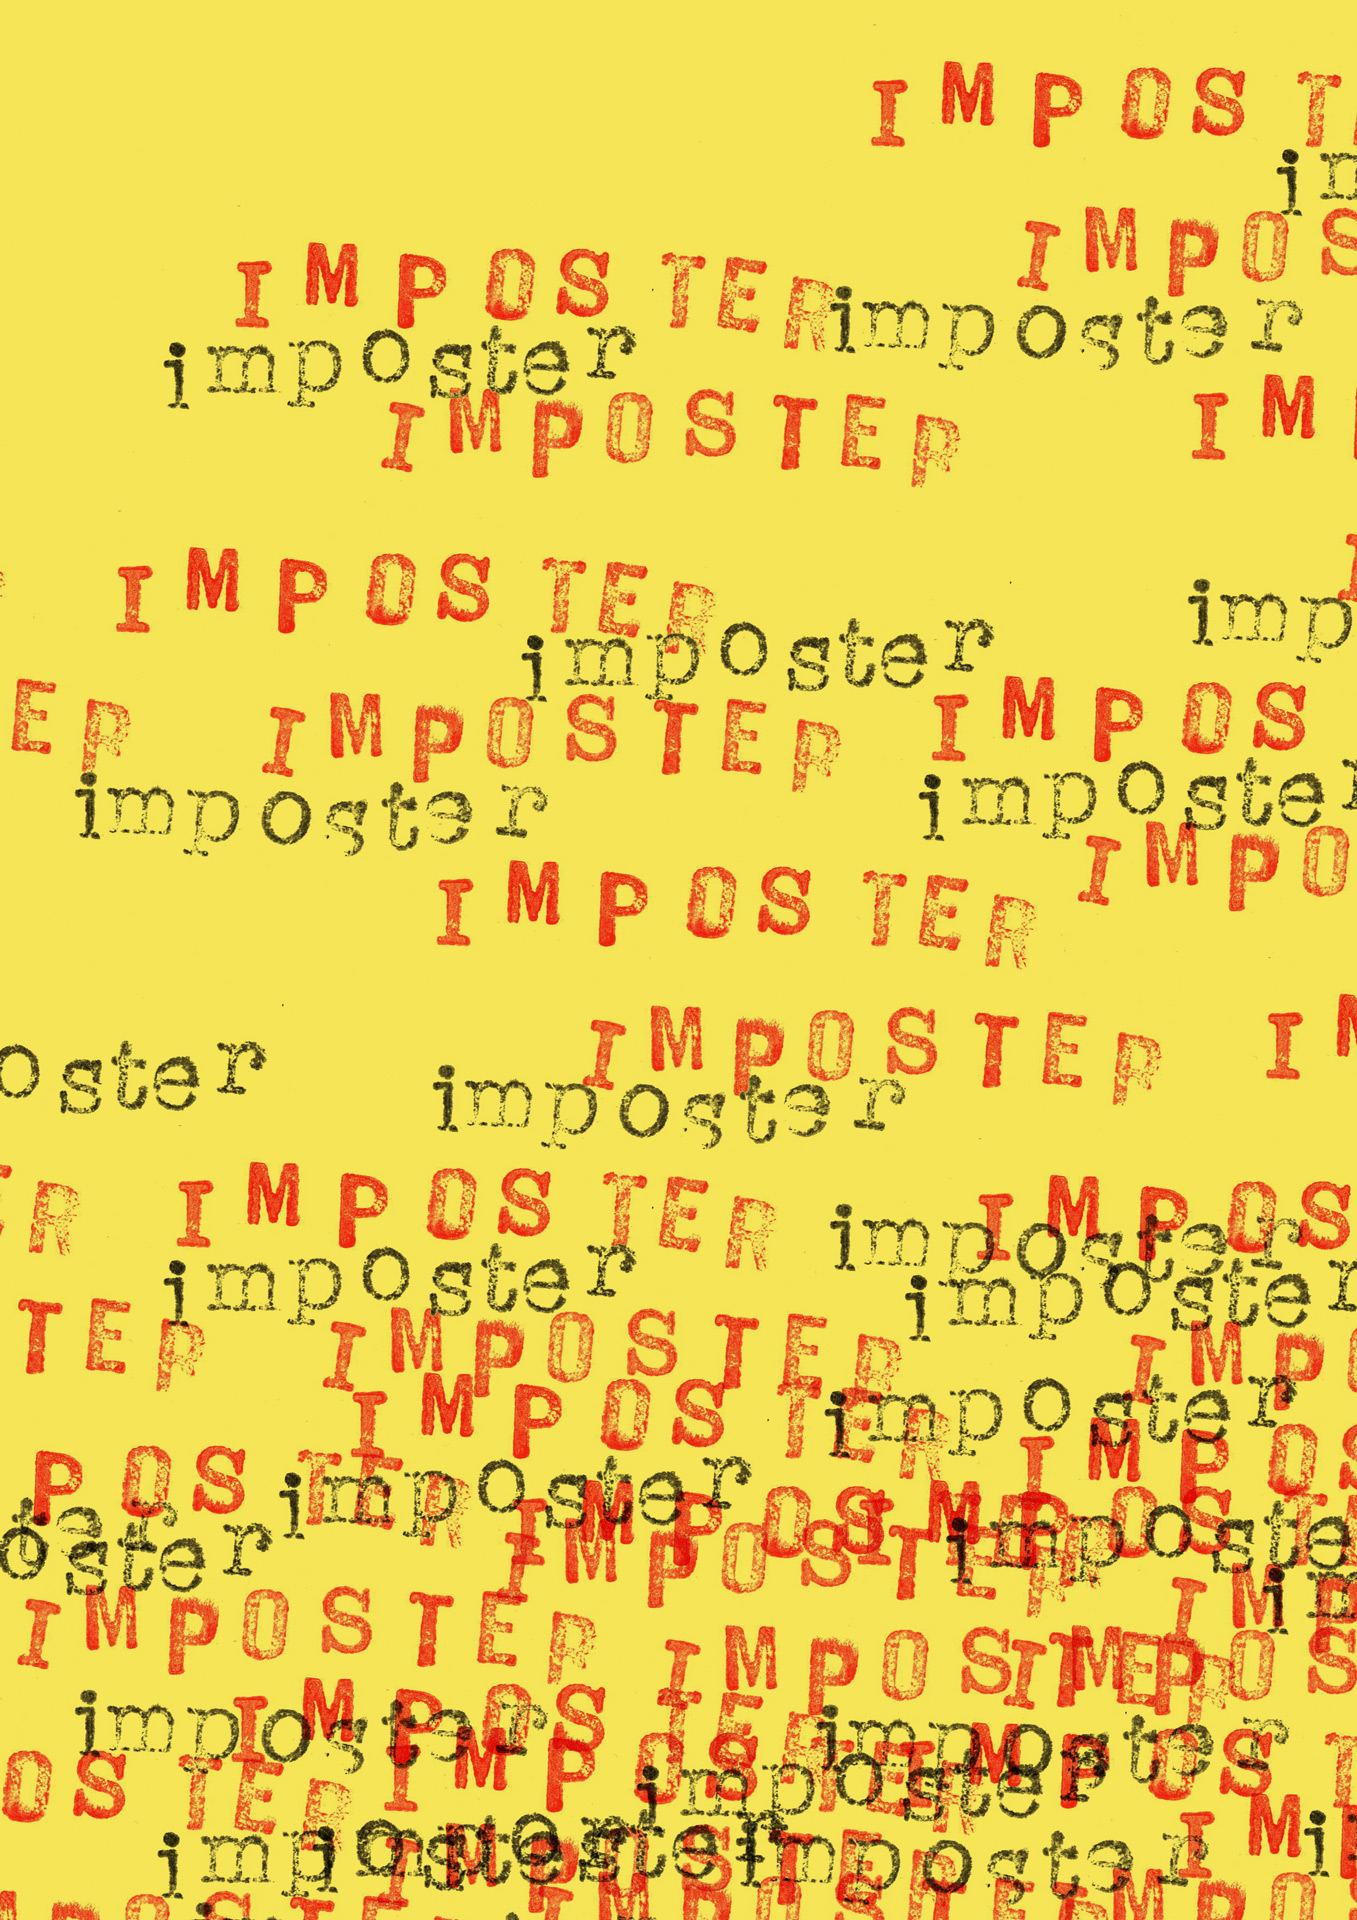 The image showcases distressed typewriter lettering in black and red, with the word 'imposter' repeating against a bright yellow background. The words overlap each other at the bottom of the image, making them difficult to read.